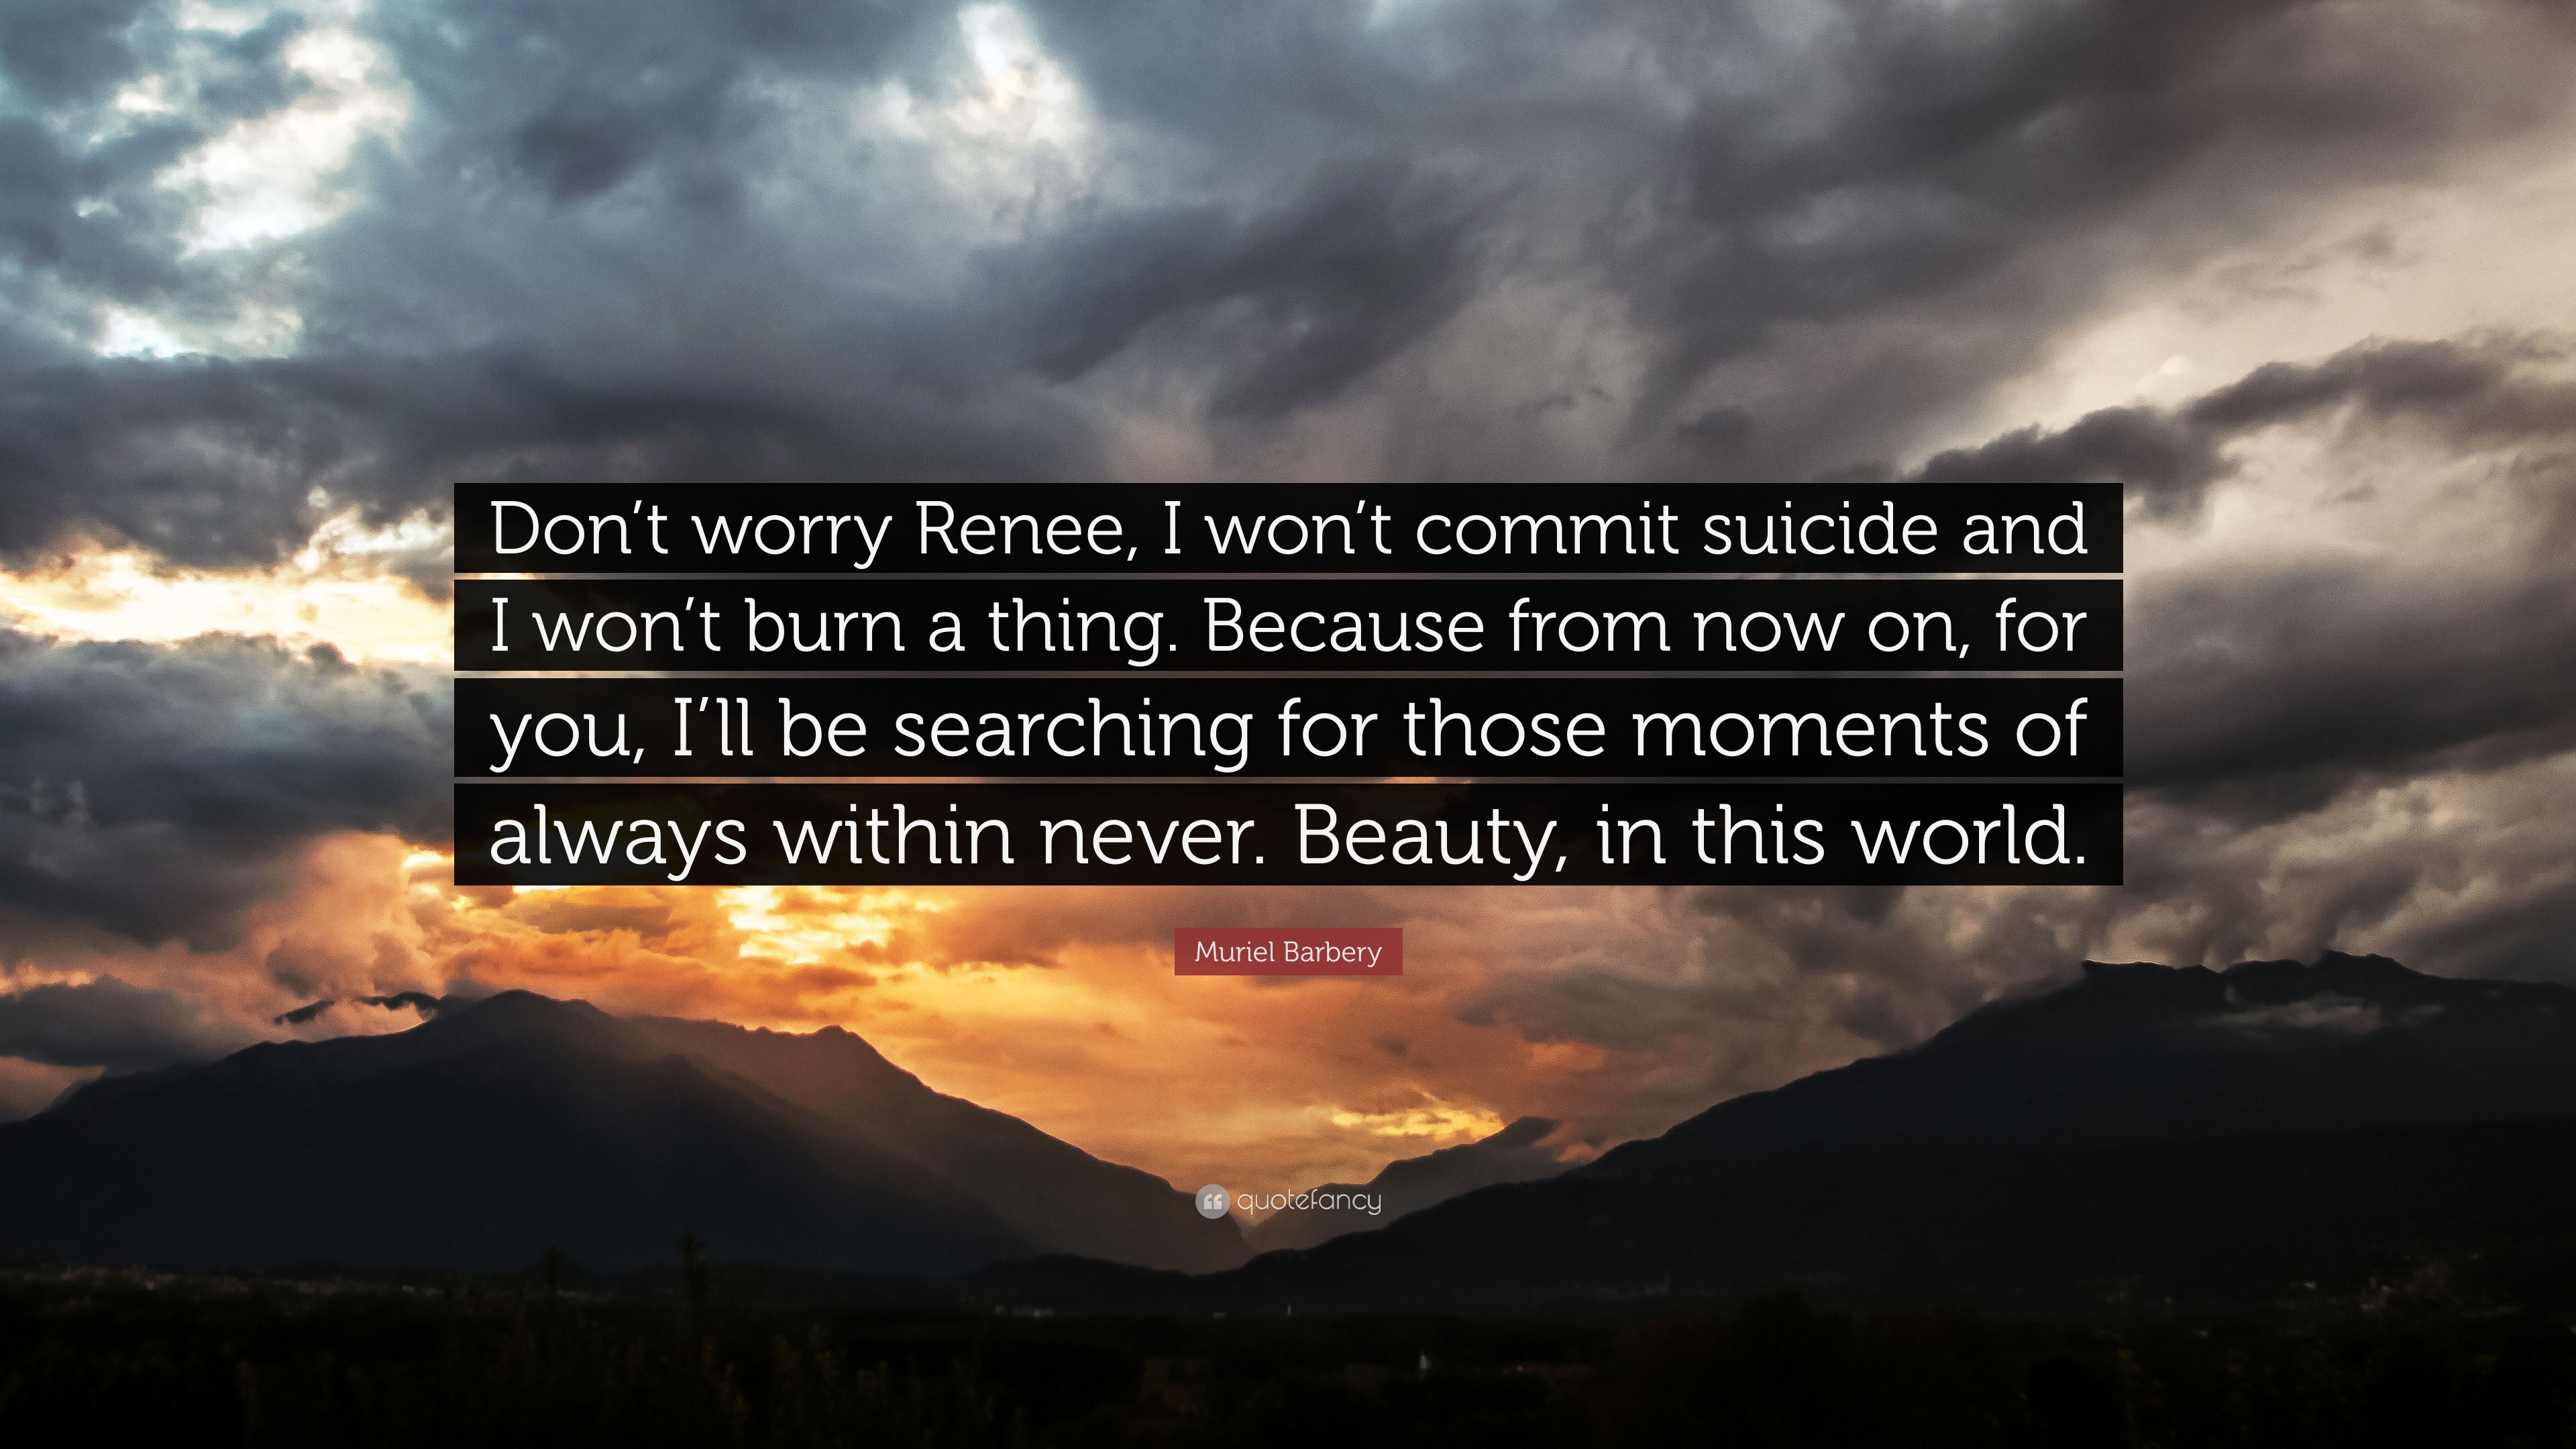 Muriel Barbery Quote: “Don't worry Renee, I won't commit suicide